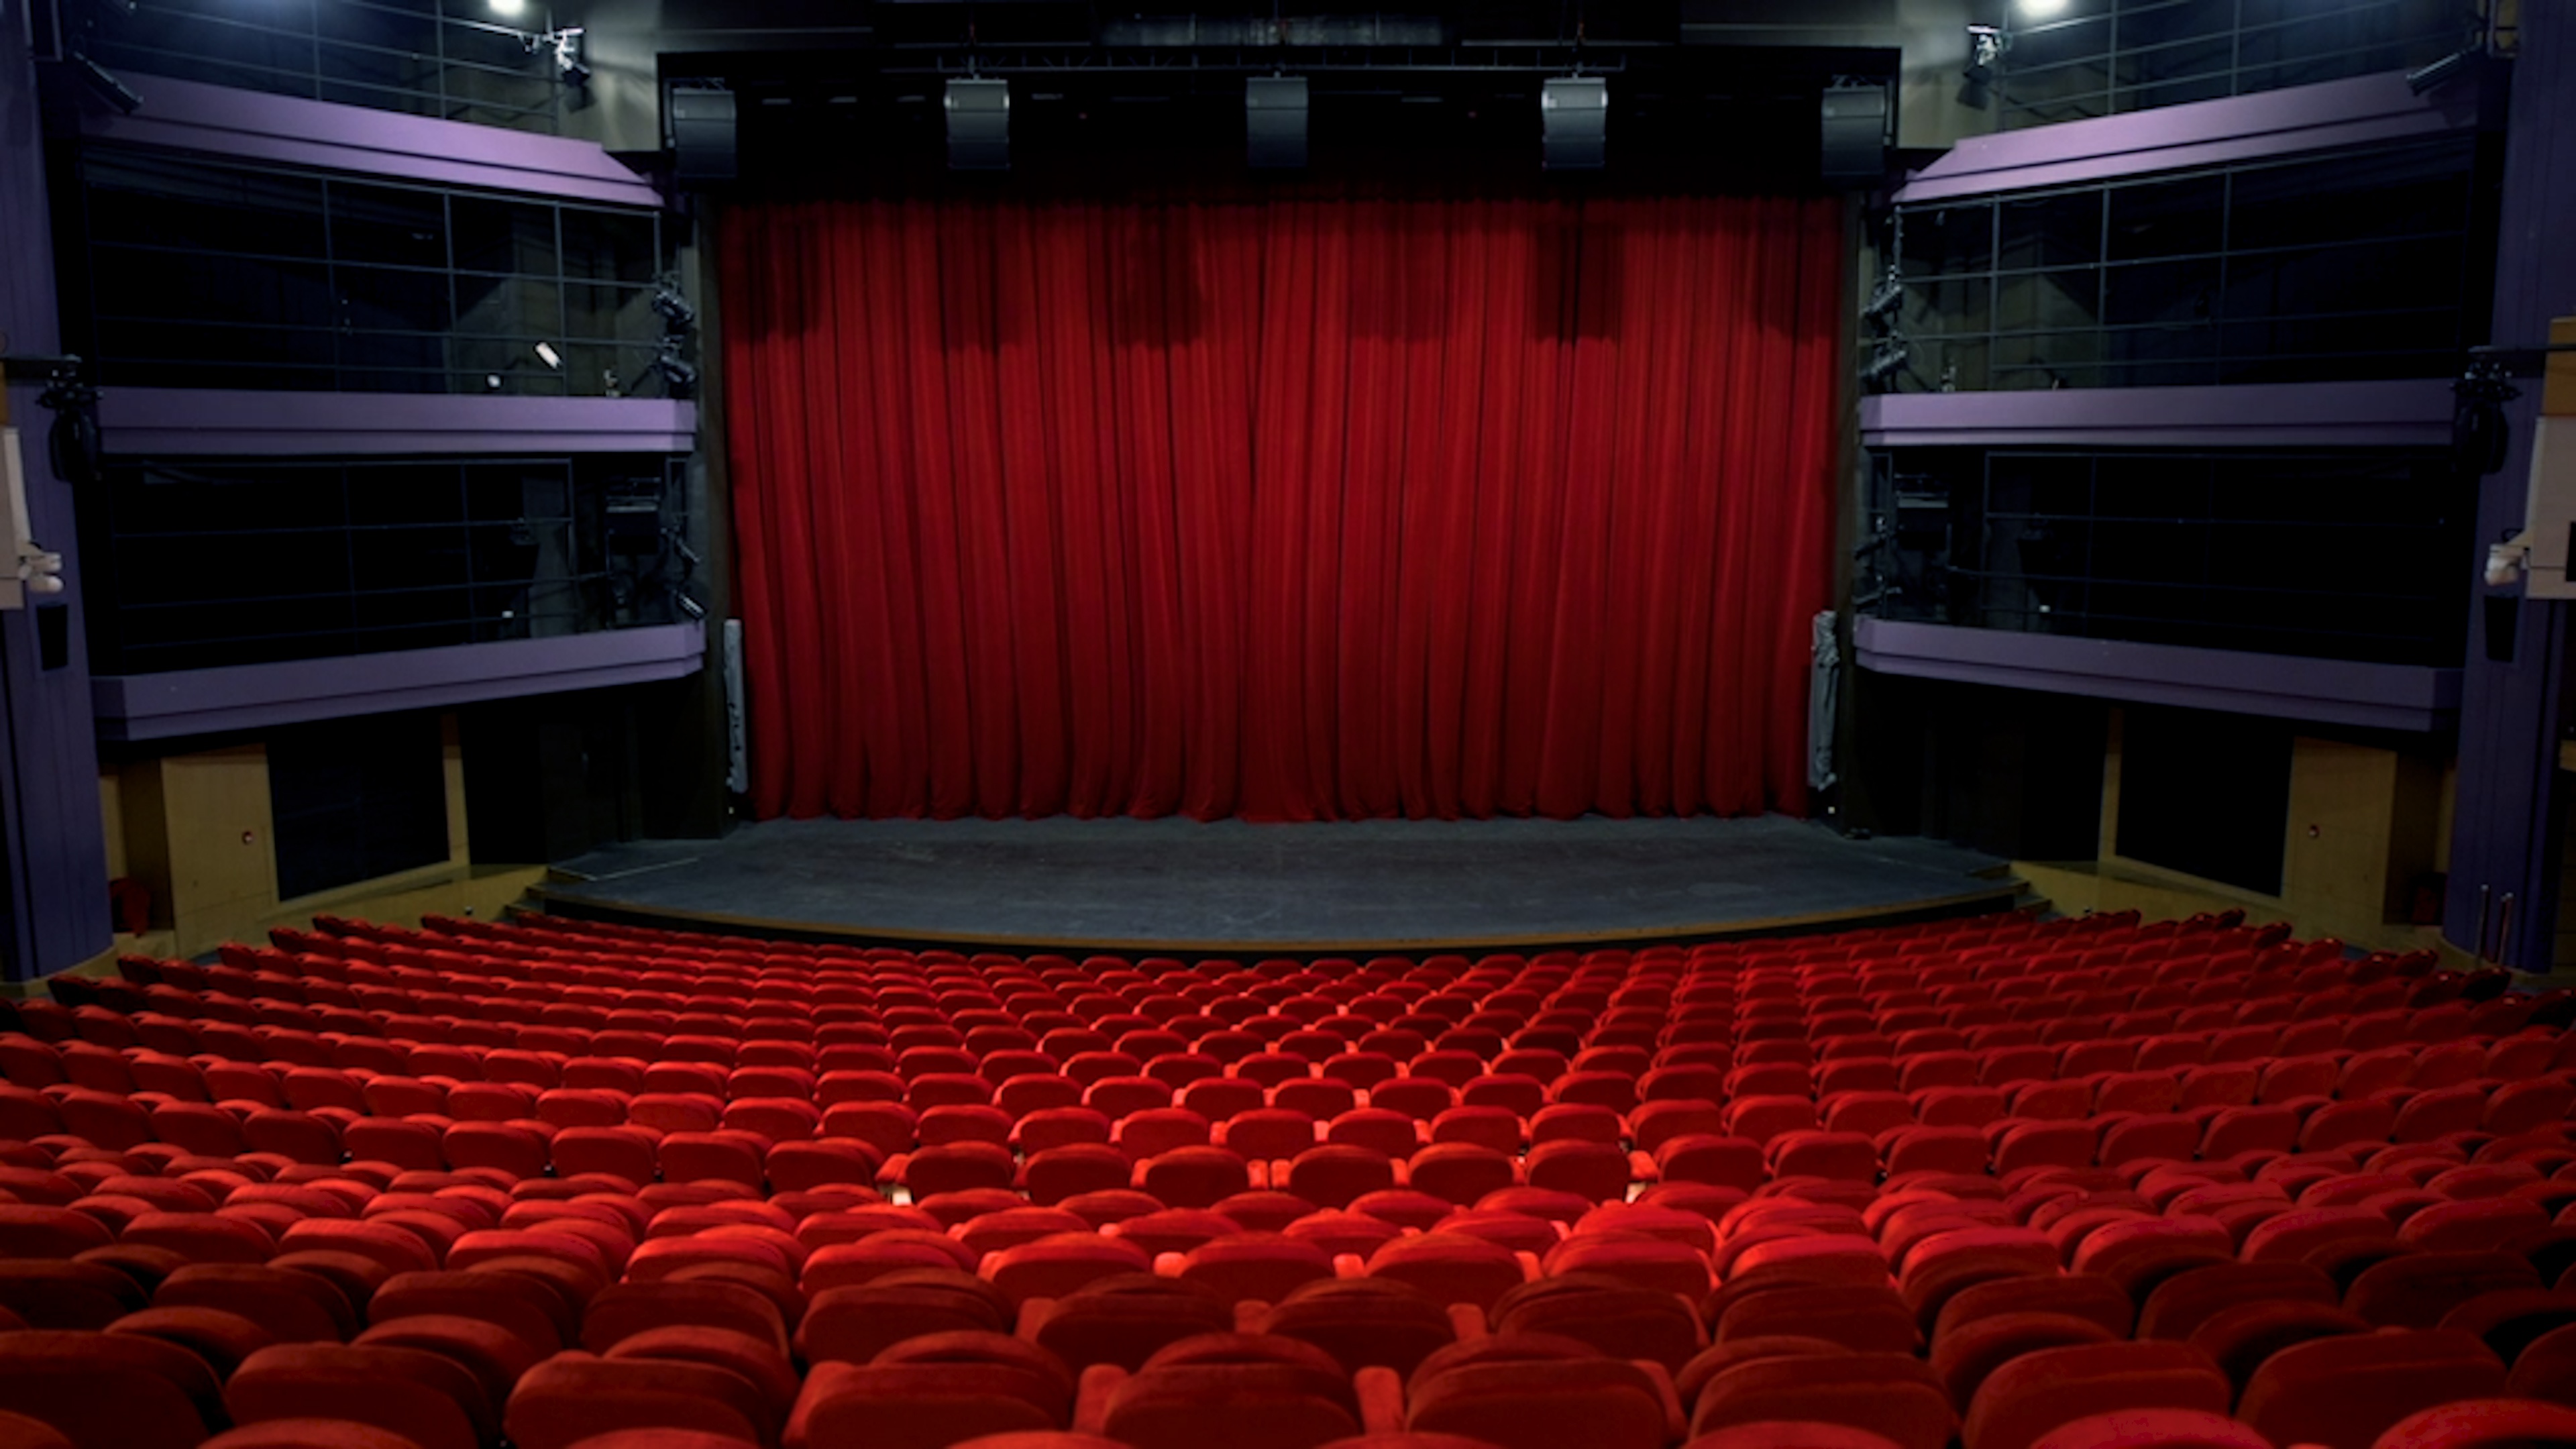 Yuen Long Theatre stage with red drapes and red theatre seating